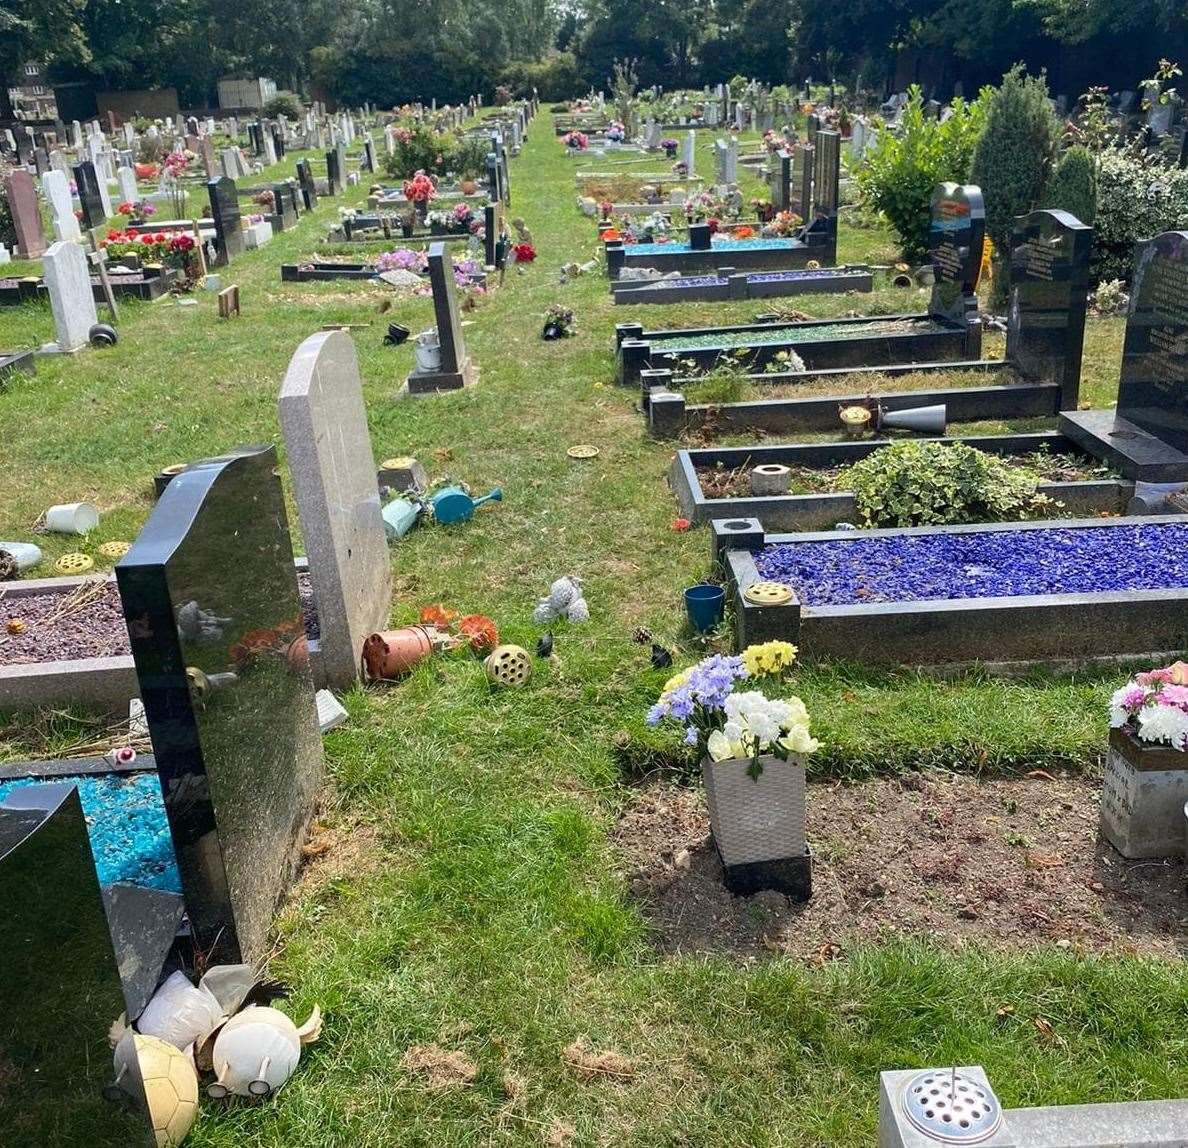 The vandalised graves in Swanscombe. Picture: Emma Ben Moussa